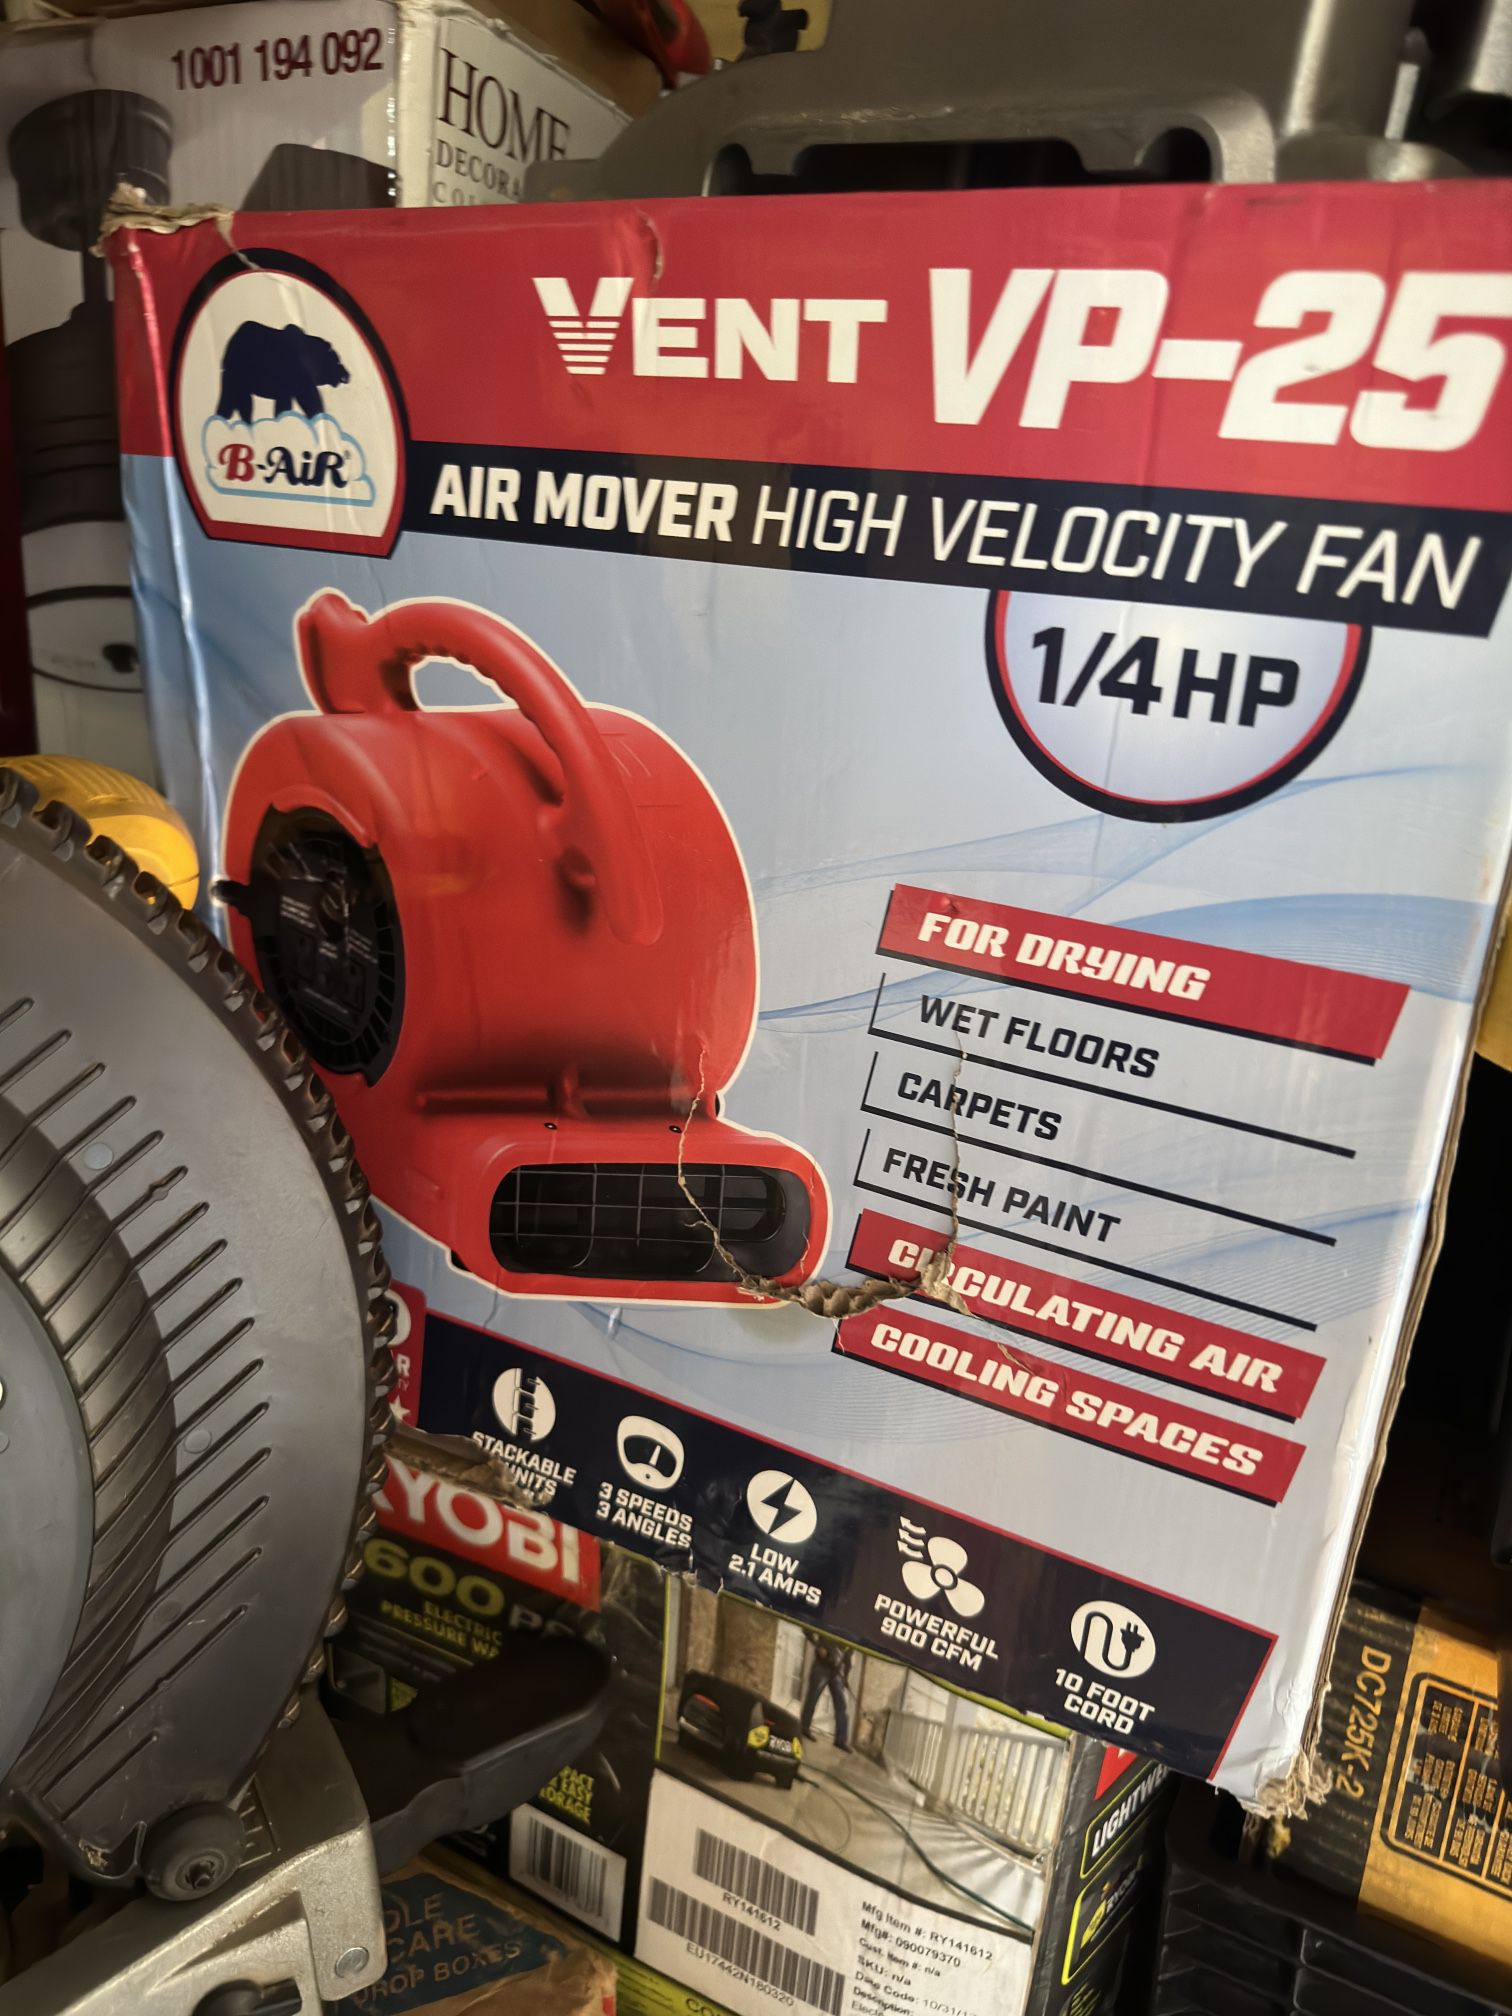 VENT VP-25 AIR MOVER HIGH VELOCITY FAN